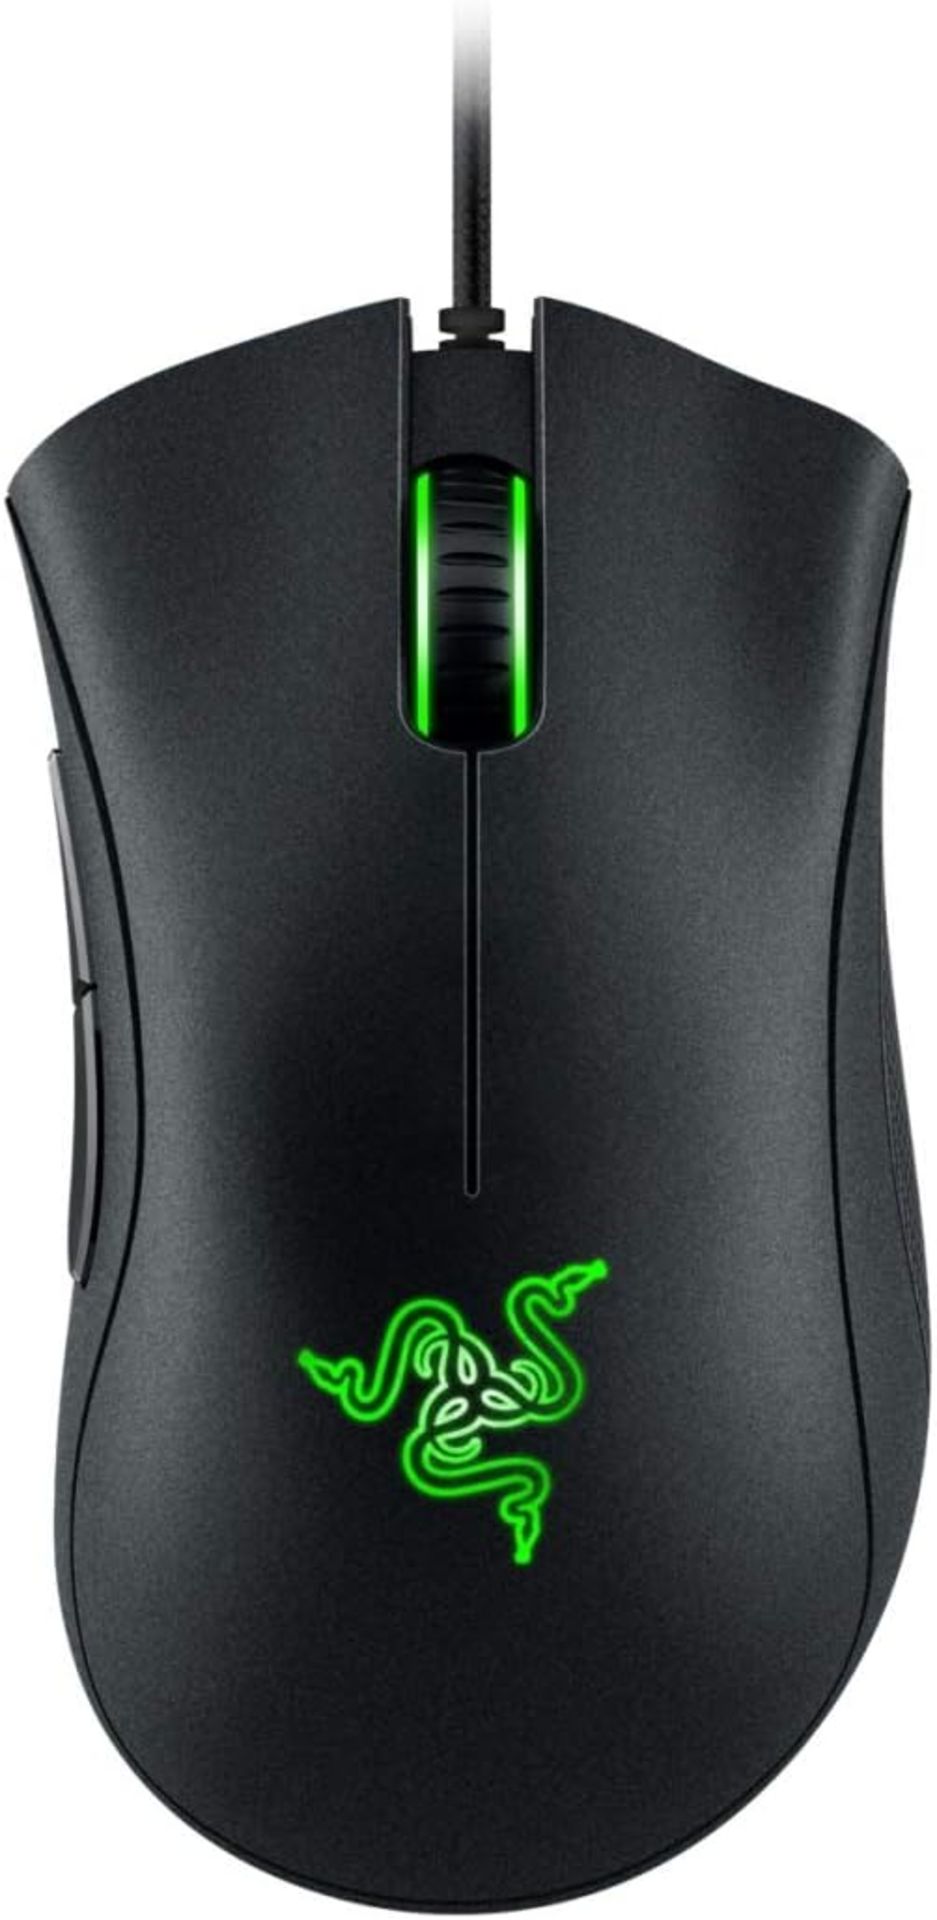 4x BRAND NEW FACTORY SEALED RAZER Deathadder Essential Gaming Mouse. RRP £22.99 EACH. The Razer